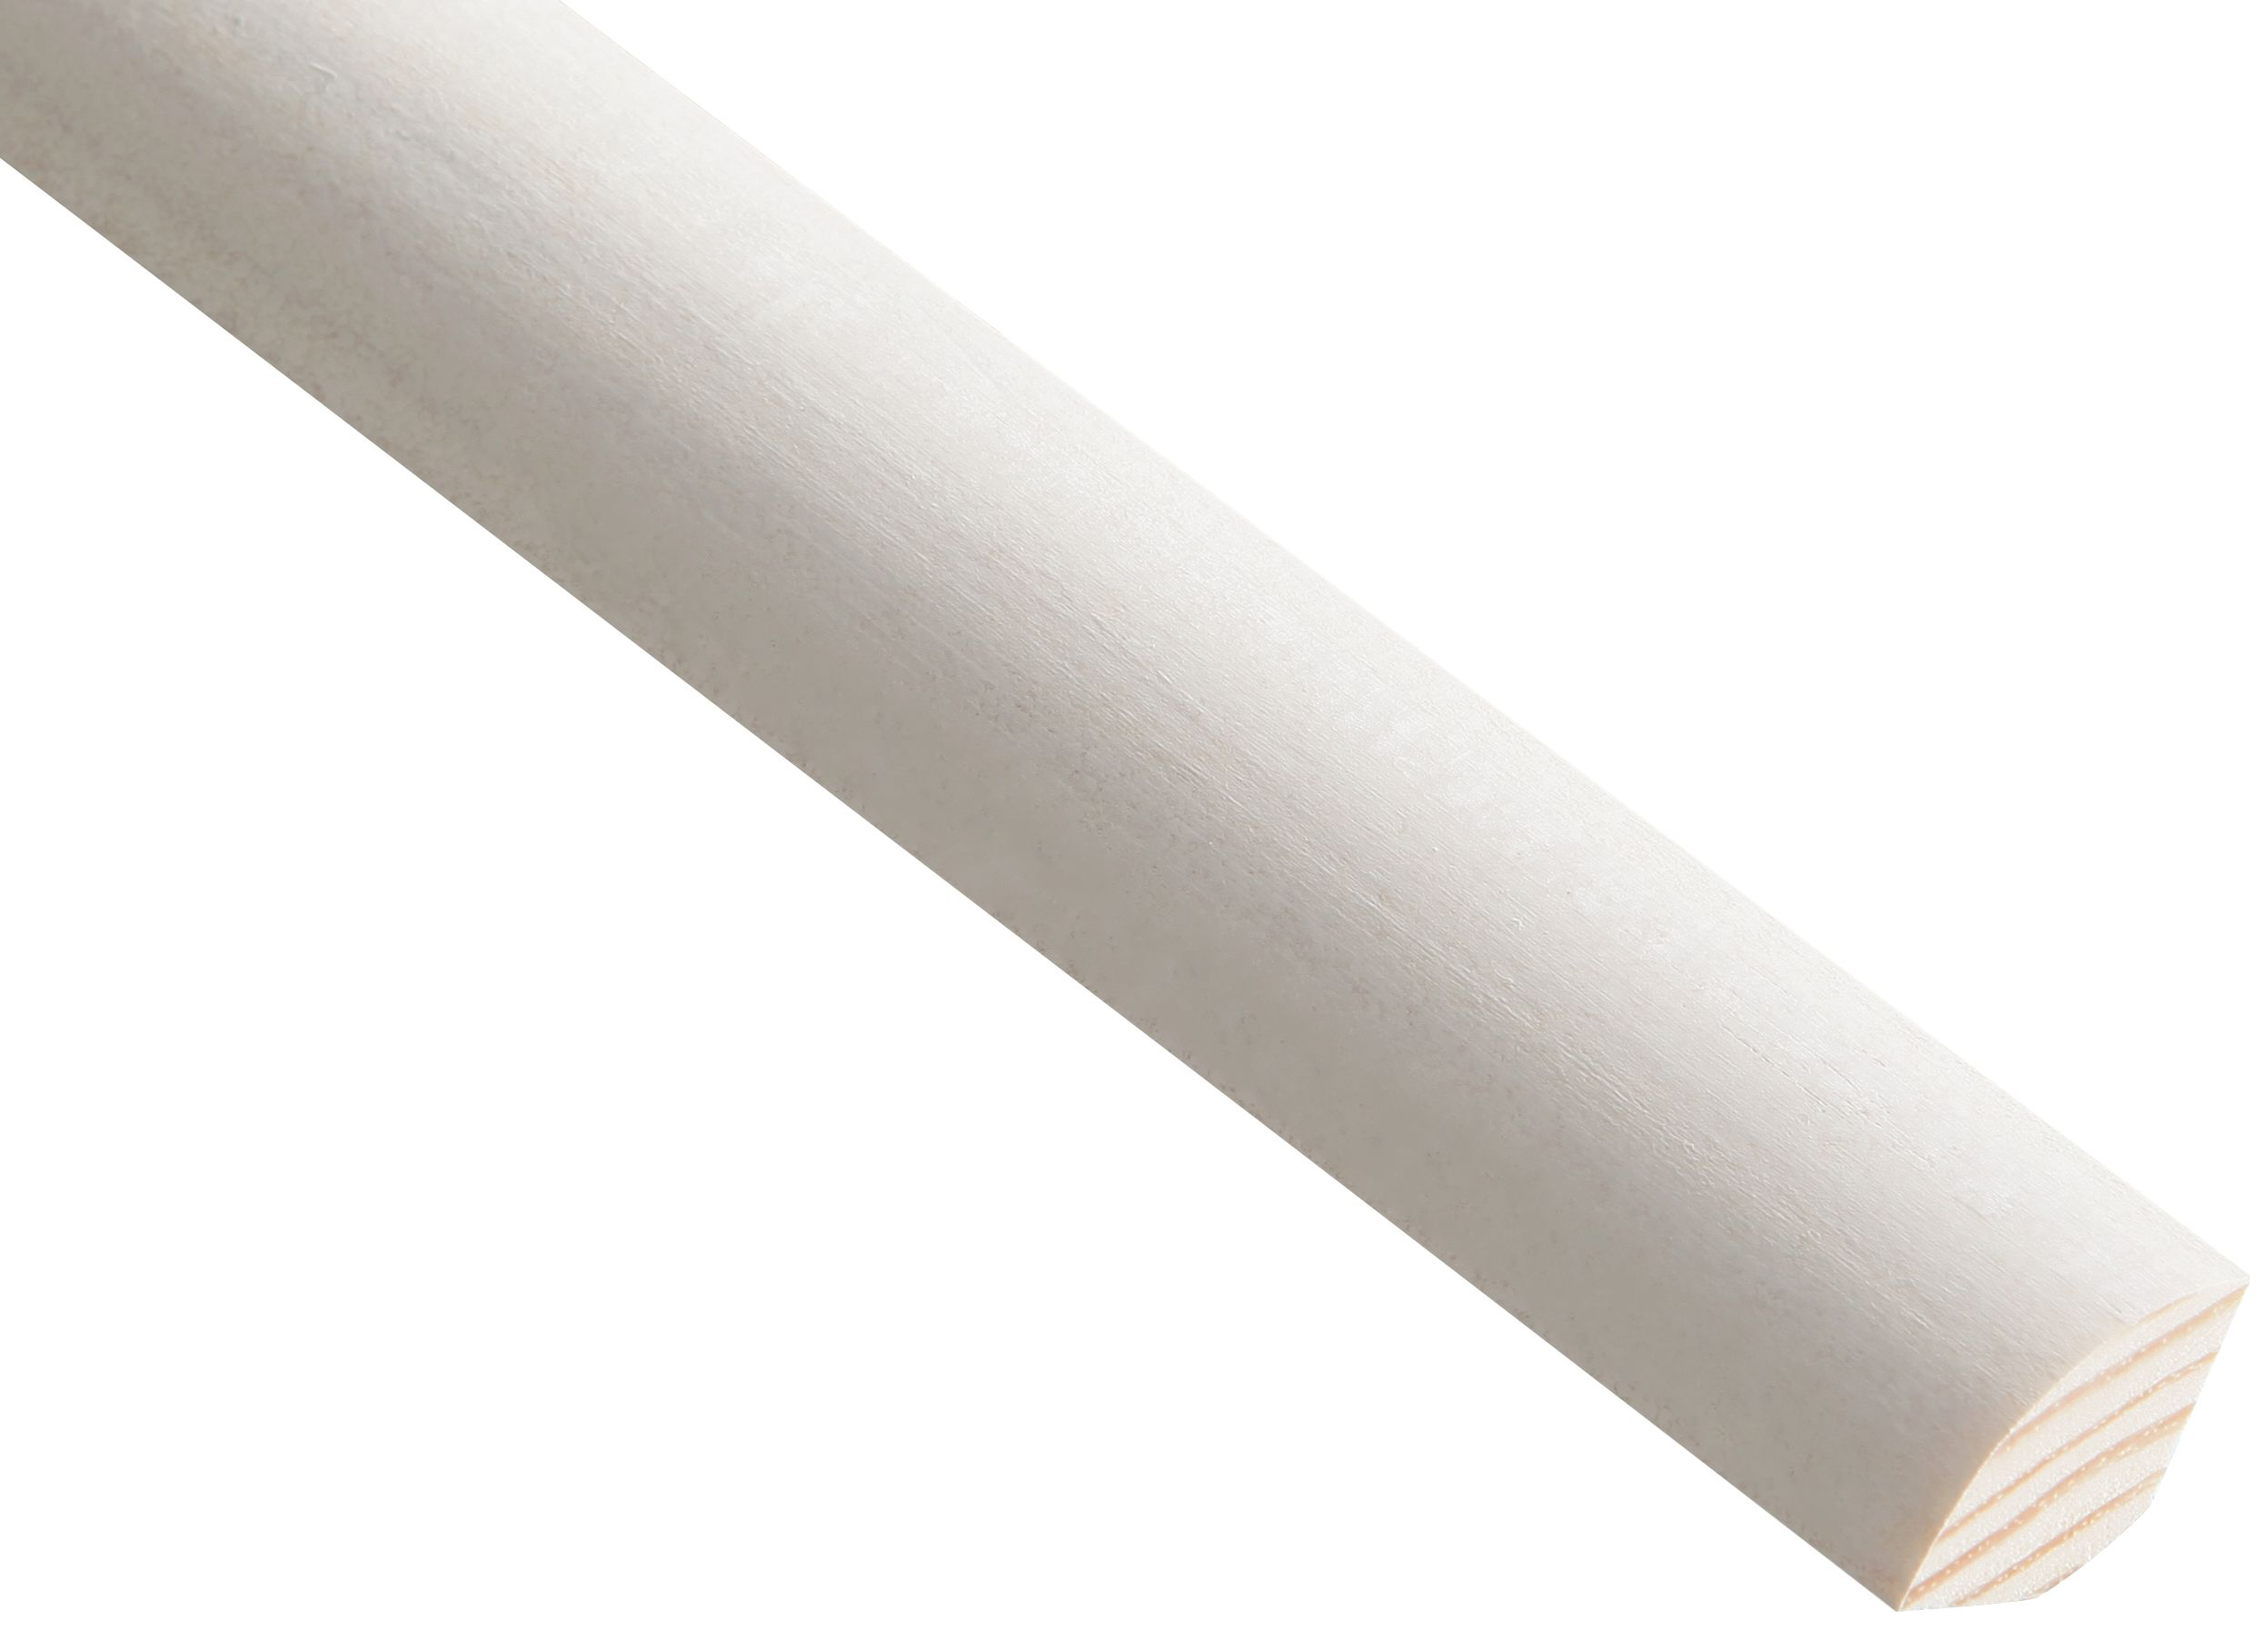 Image of Wickes Primed Quadrant Moulding - 21 x 21 x 2400mm